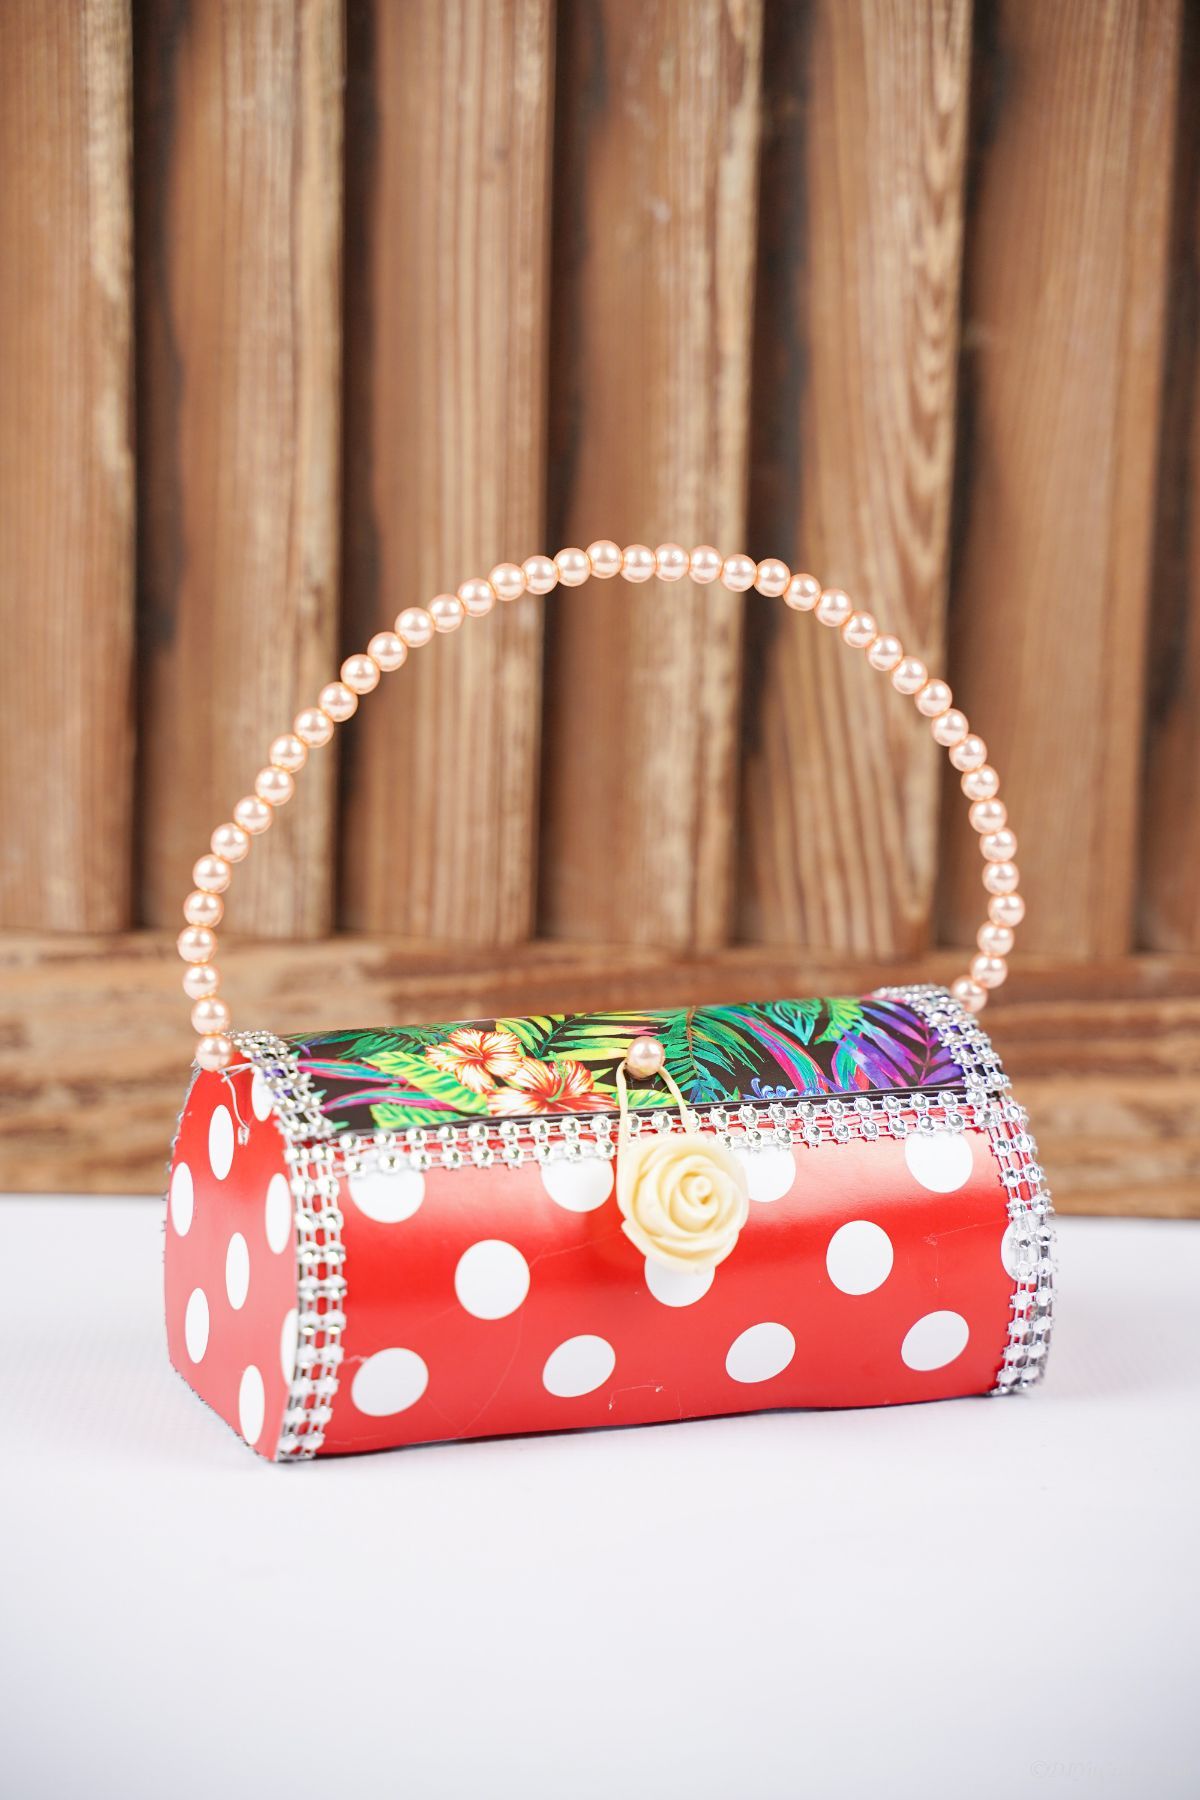 wood paneling behind small red and white purse with colorful flower top